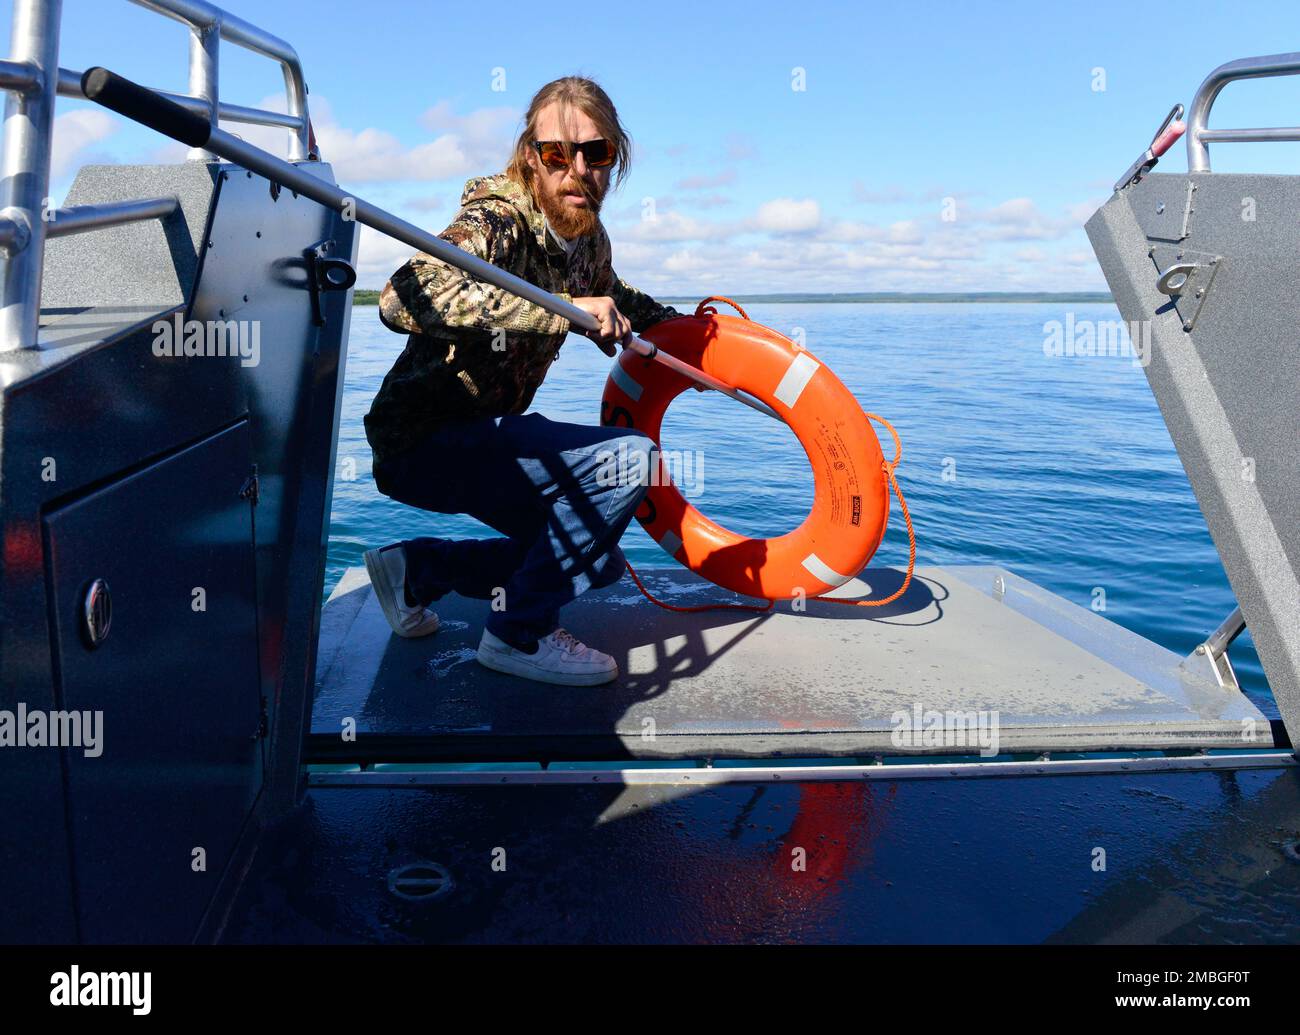 https://c8.alamy.com/comp/2MBGF0T/bo-anderson-a-deckhand-aboard-passenger-vessel-otis-retrieves-a-life-ring-from-the-water-during-a-man-overboard-drill-while-underway-on-naknek-river-in-naknek-alaska-june-15-2022-inspectors-with-sector-anchorages-marine-safety-task-force-conducted-inspections-and-commercial-fishing-vessel-exams-throughout-the-bristol-bay-region-june-13-24-u-s-coast-guard-photo-by-petty-officer-2nd-class-melissa-e-f-mckenzie-2MBGF0T.jpg